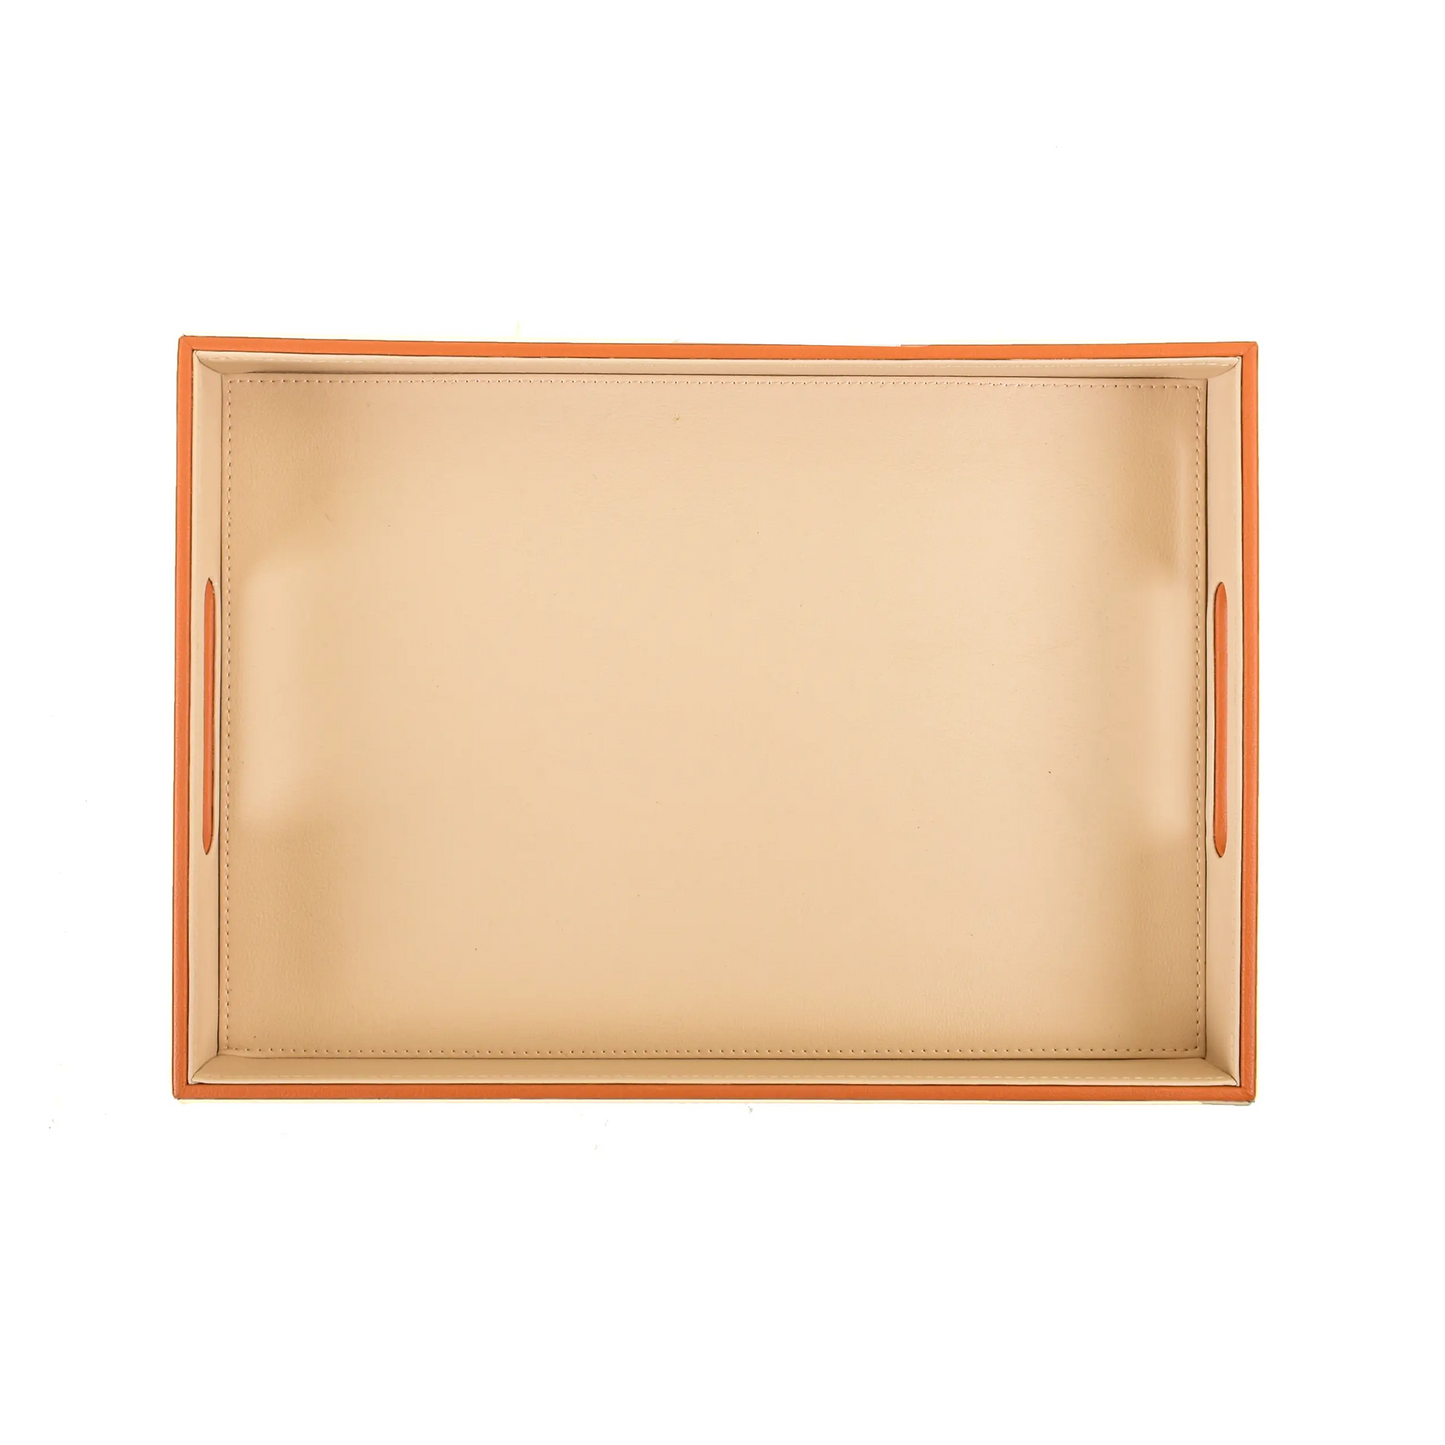 Leatherette Rectangle Serving Tray Set of 2 | Beige | Axis 2.0 ICHKAN